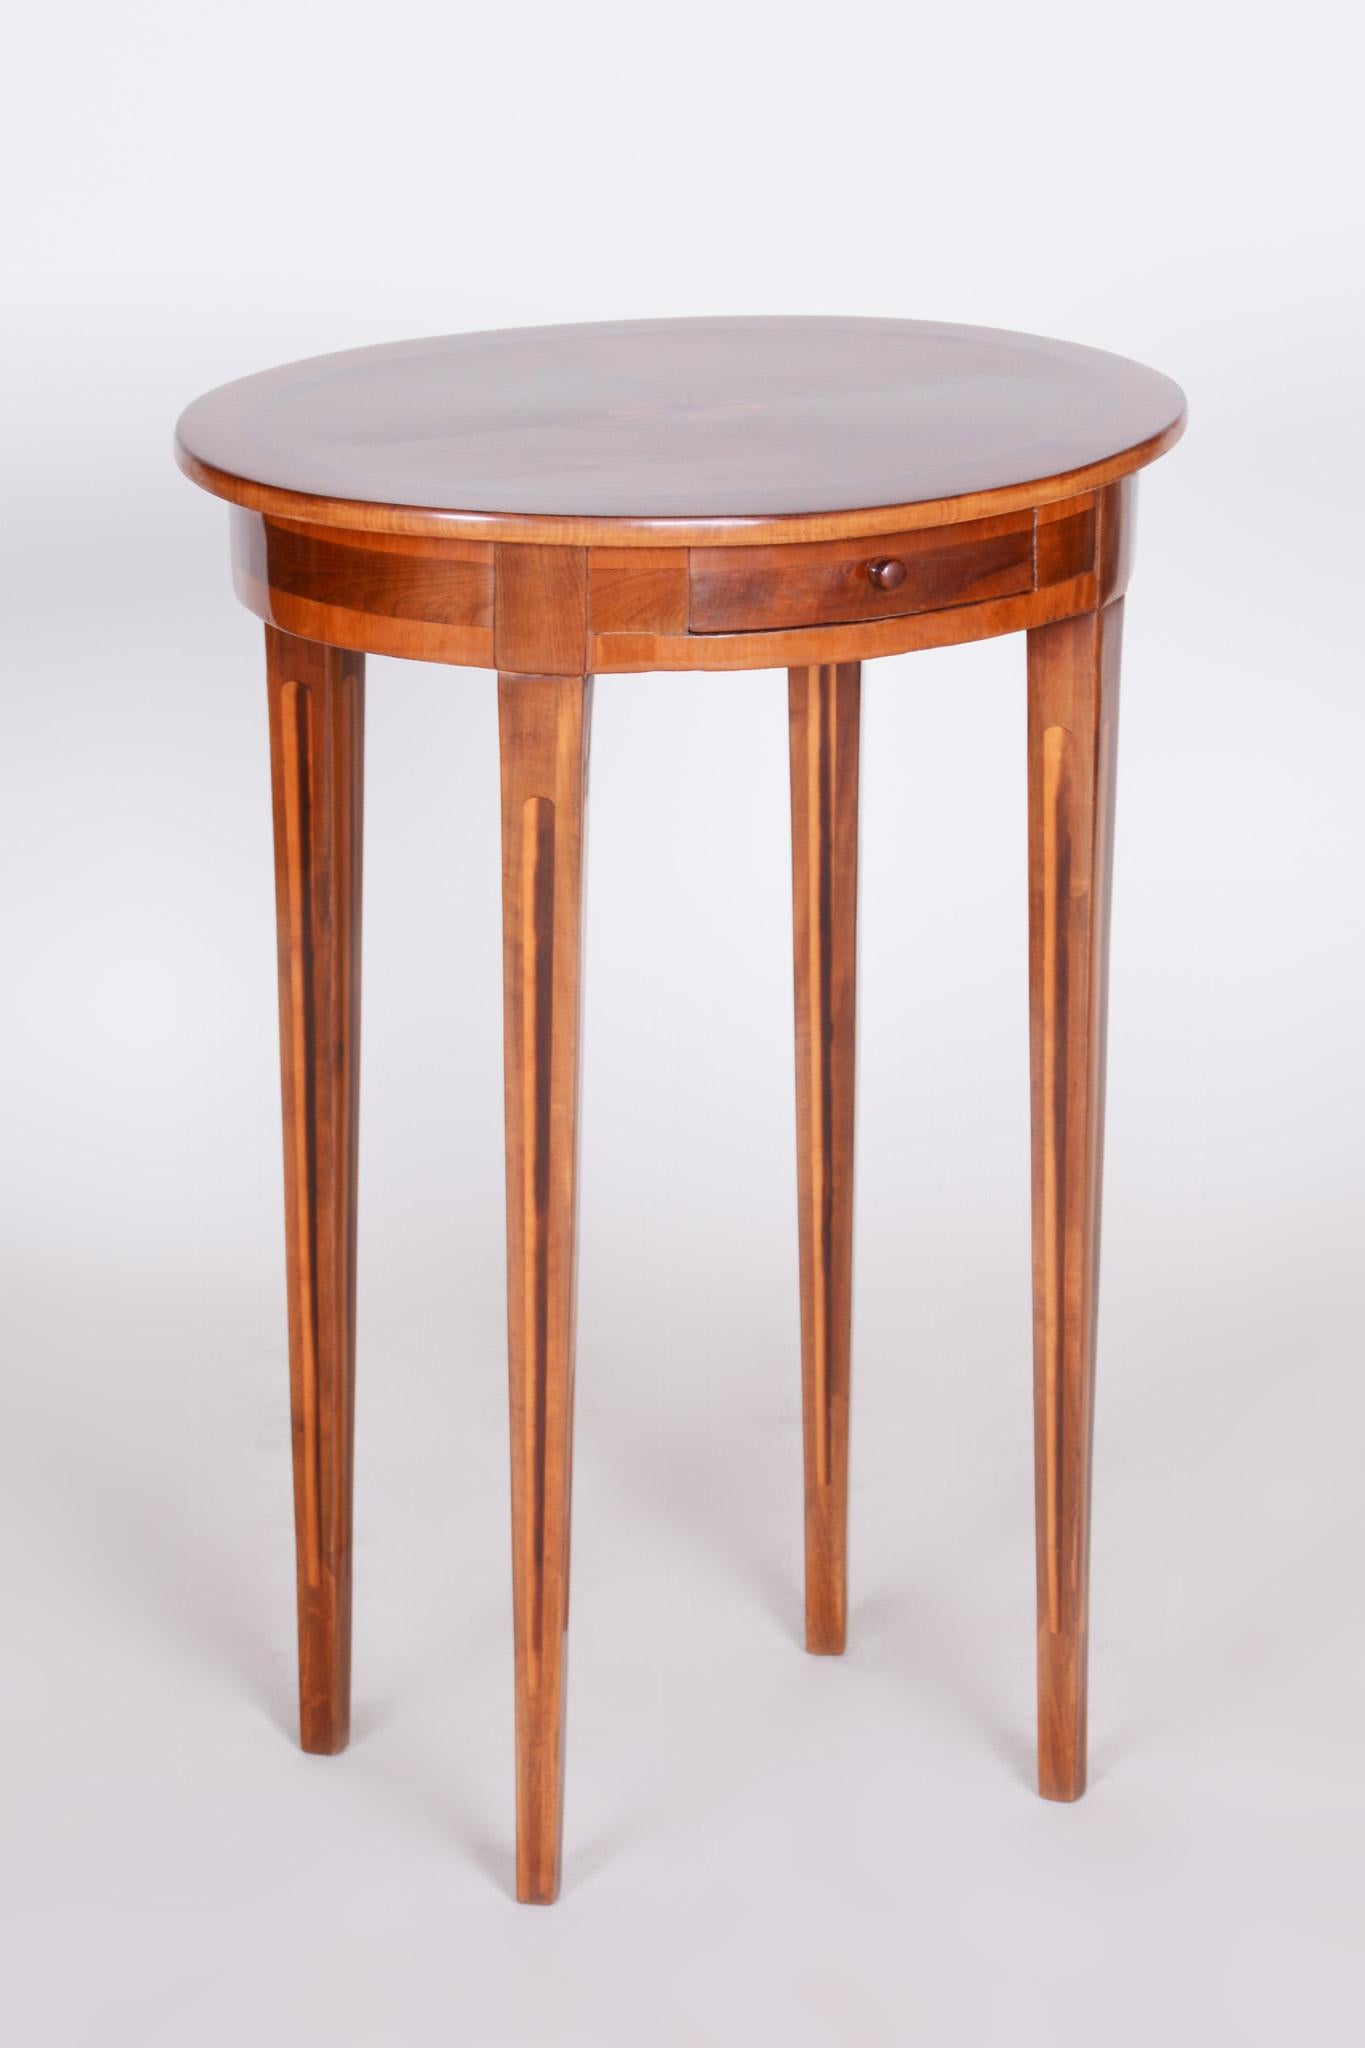 Biedermeier Small Brown Yew-Tree Classicism Inlaid Table, Italy, 1810s, Shellac Polished For Sale